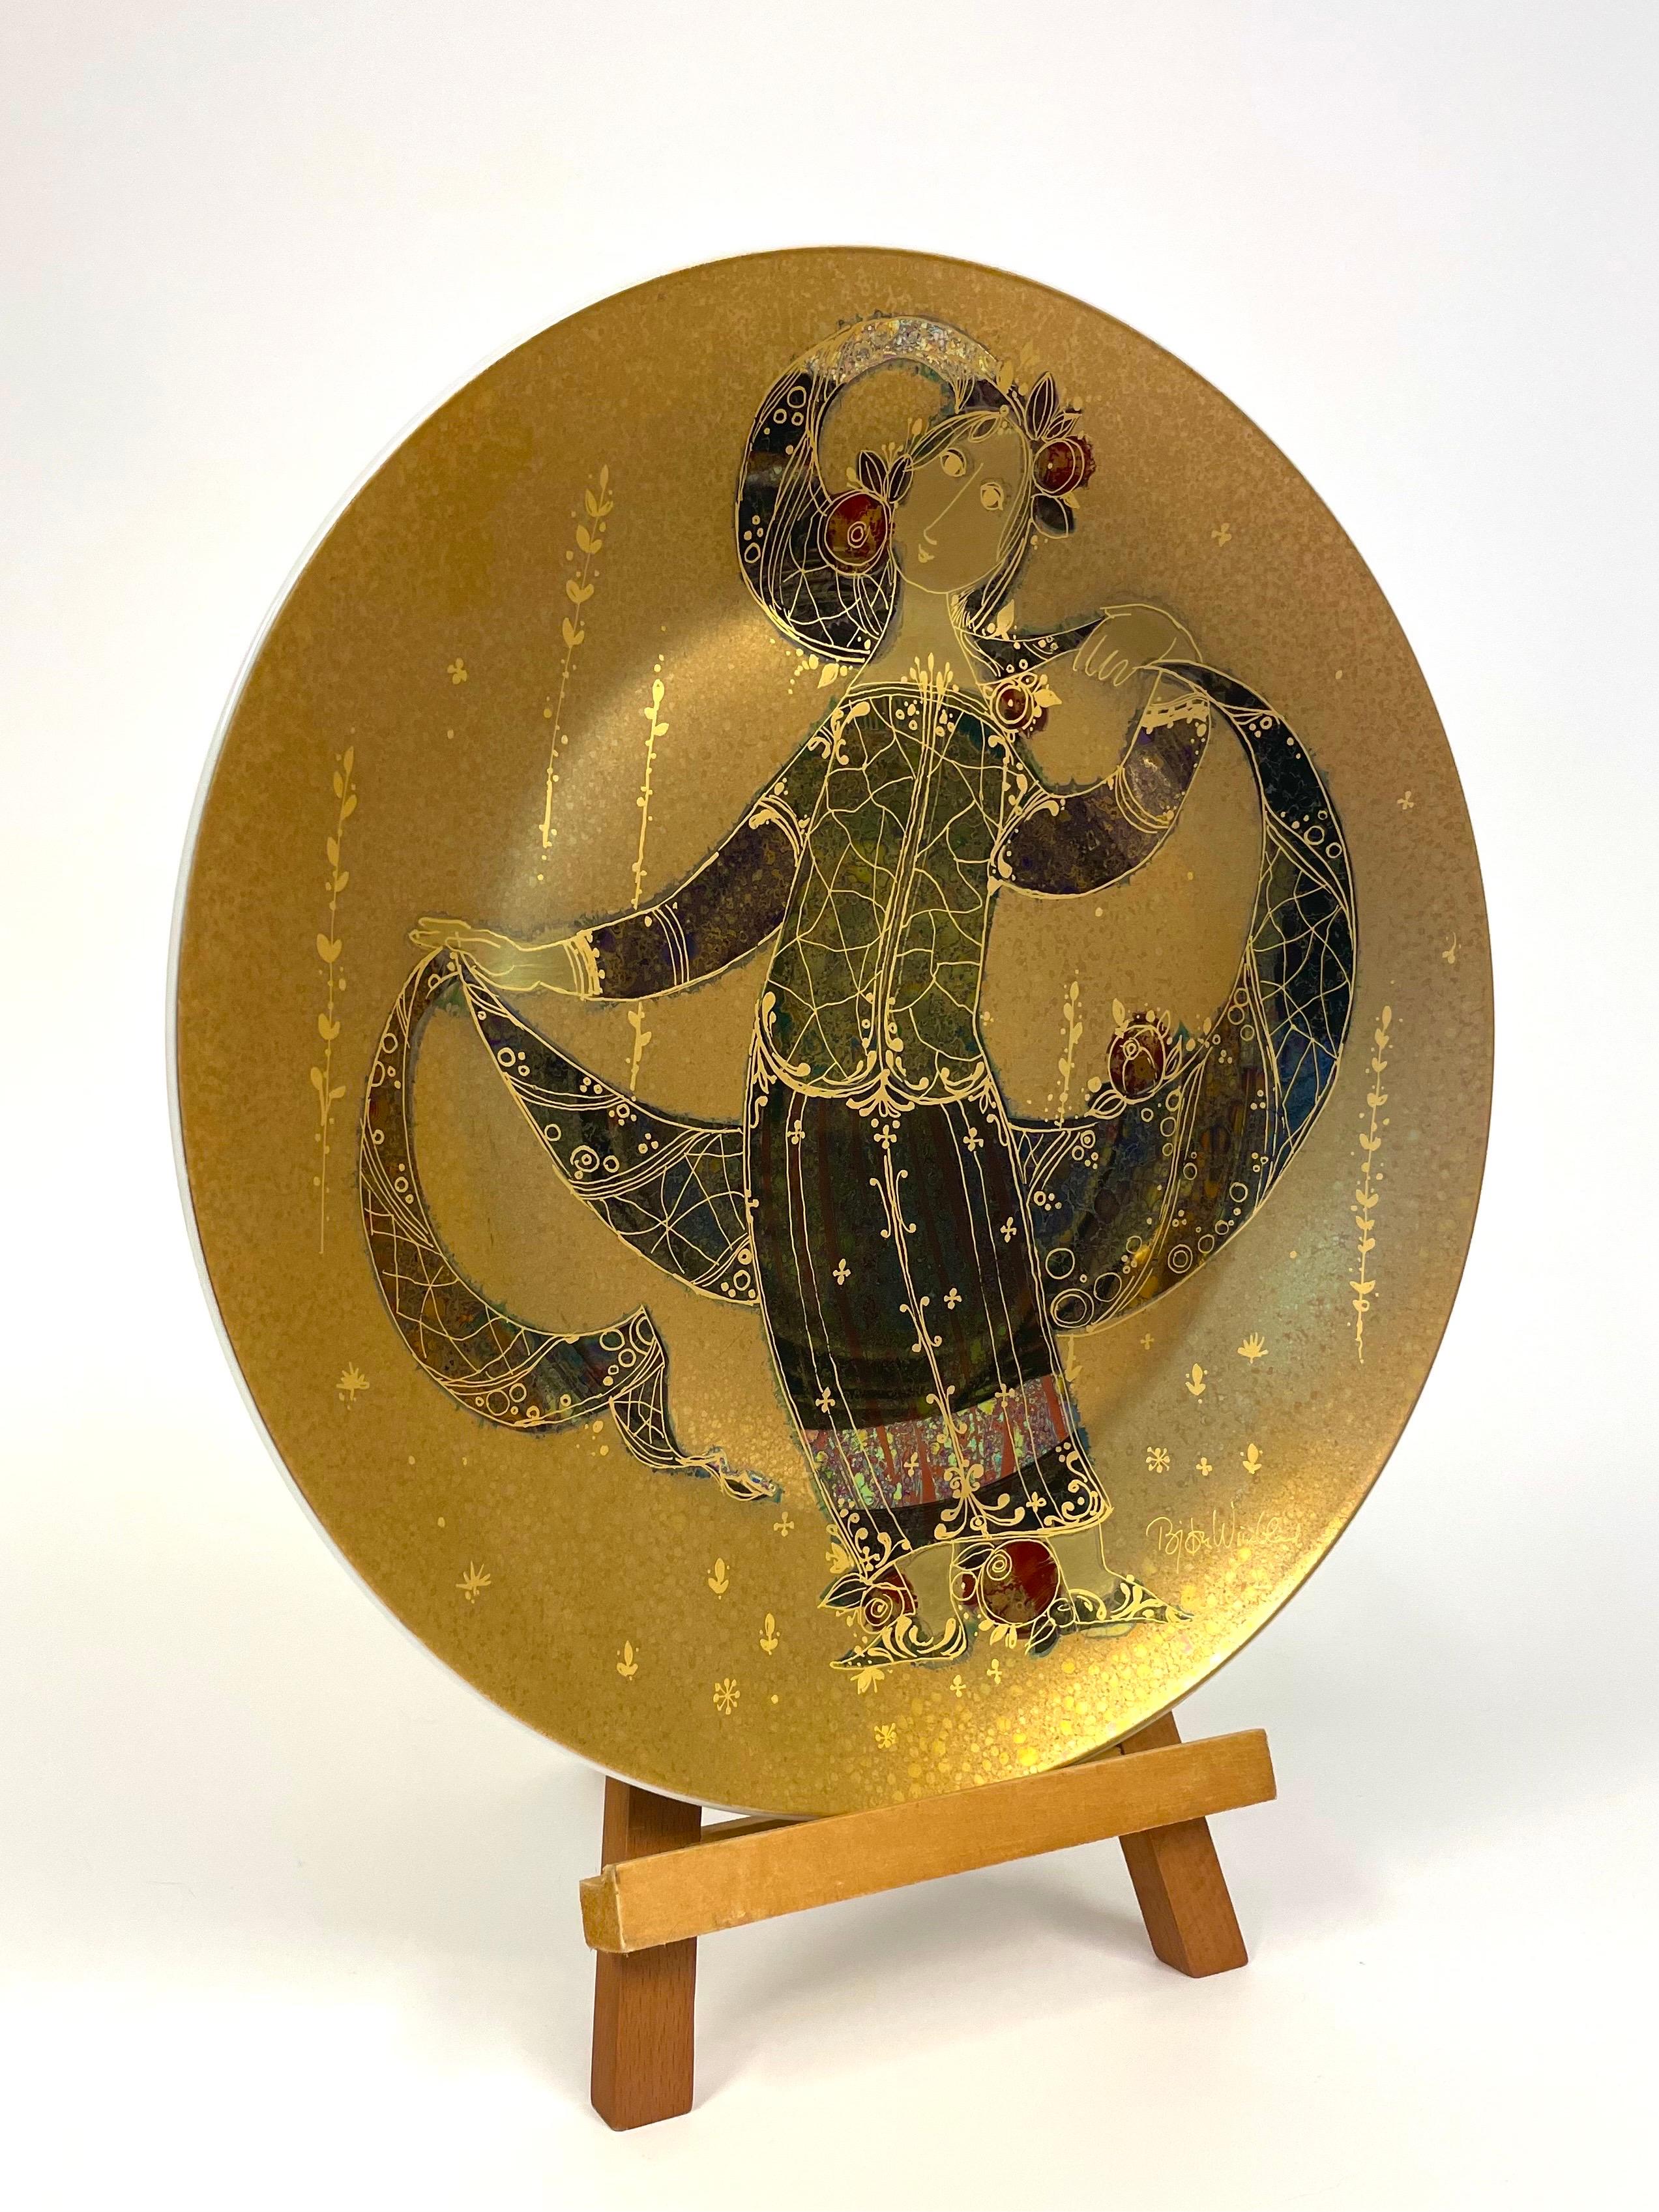 This is a large German porcelain platter from Rosenthal, designed 1979 by Bjørn Wiinbladh, Denmark for the company’s 100-years anniversary.
It is hand painted and partly metal gilded.

The platter measures:
Ø 33 cm.
H 3.5